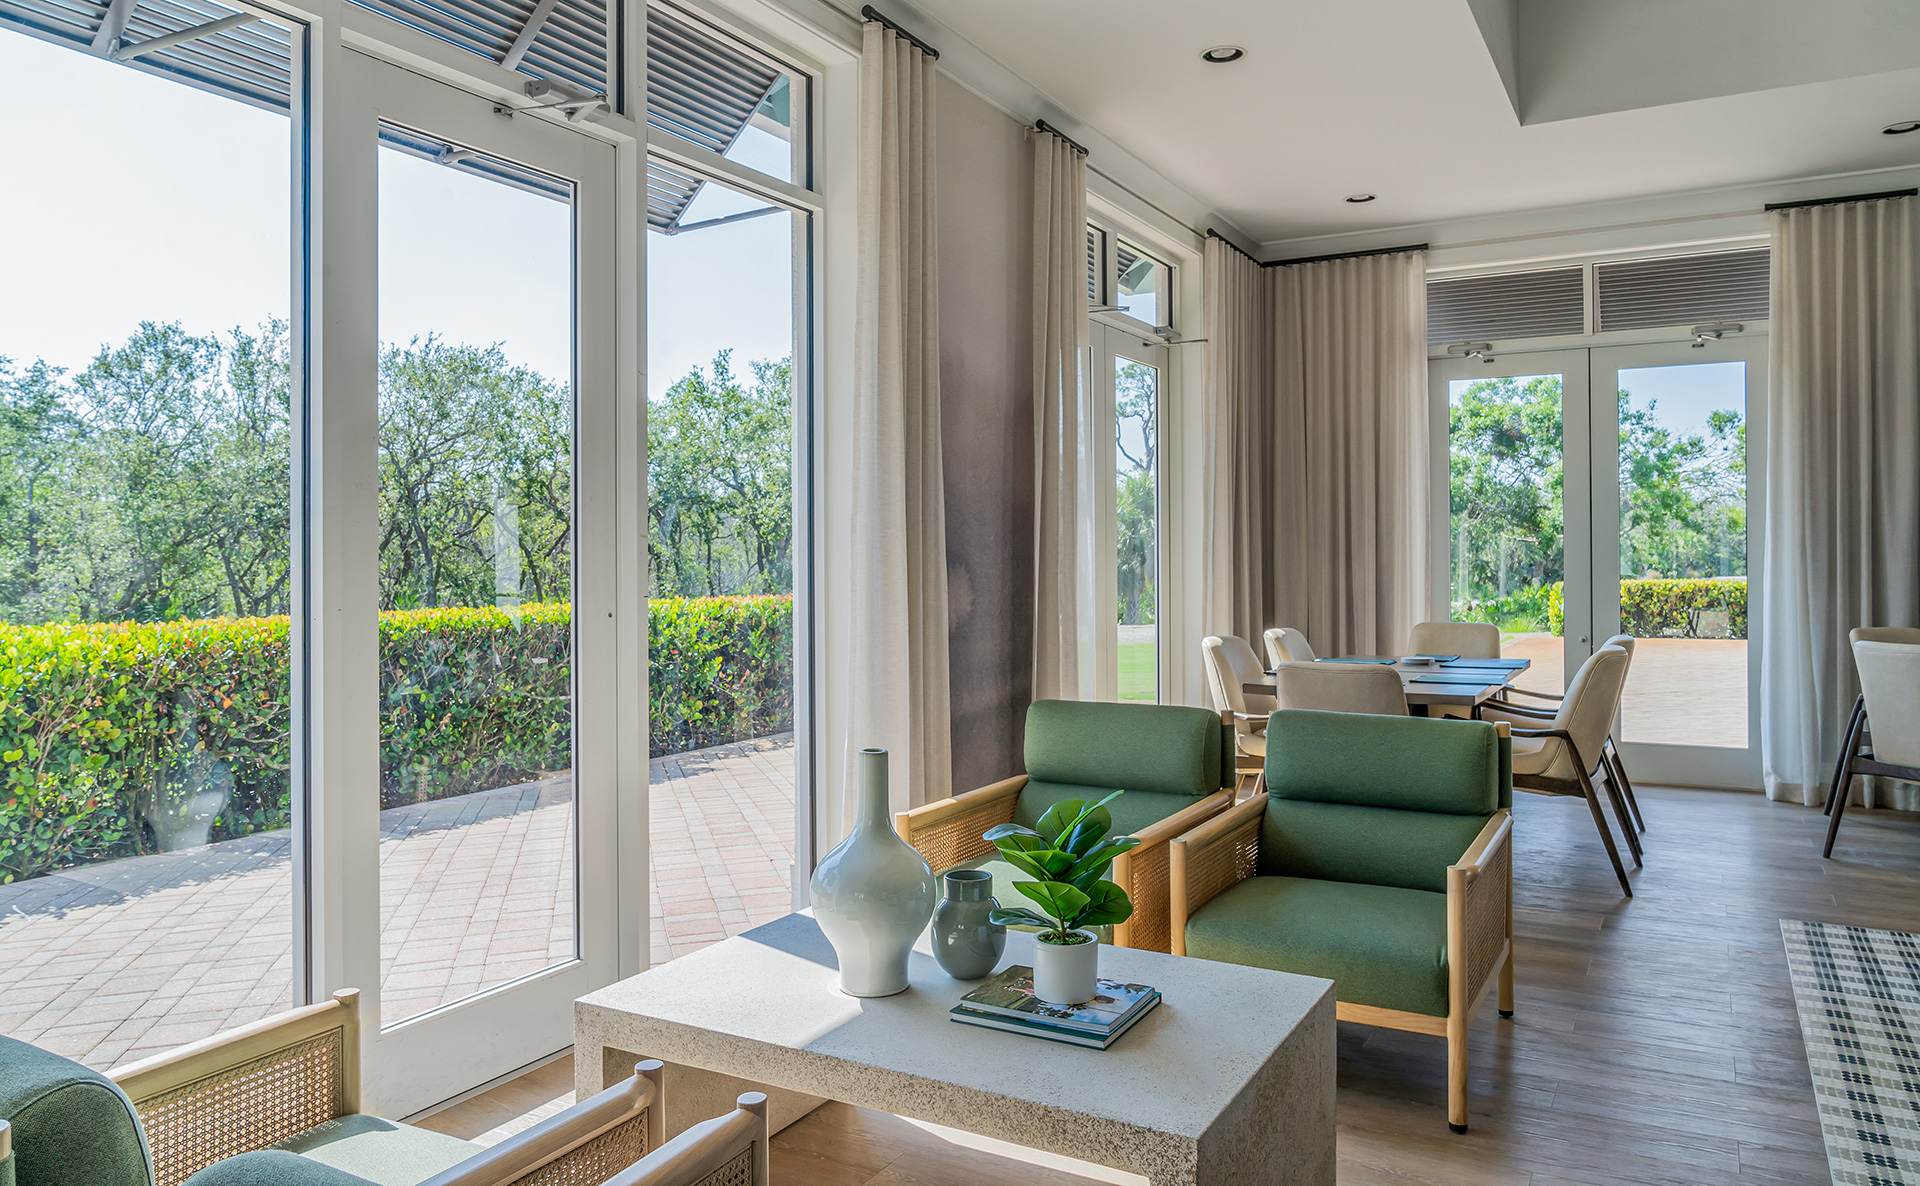 A living room in the beautiful Saltleaf Golf Preserve community, with sliding glass doors offering stunning views of the neighboring championship golf course in Bonita Springs.